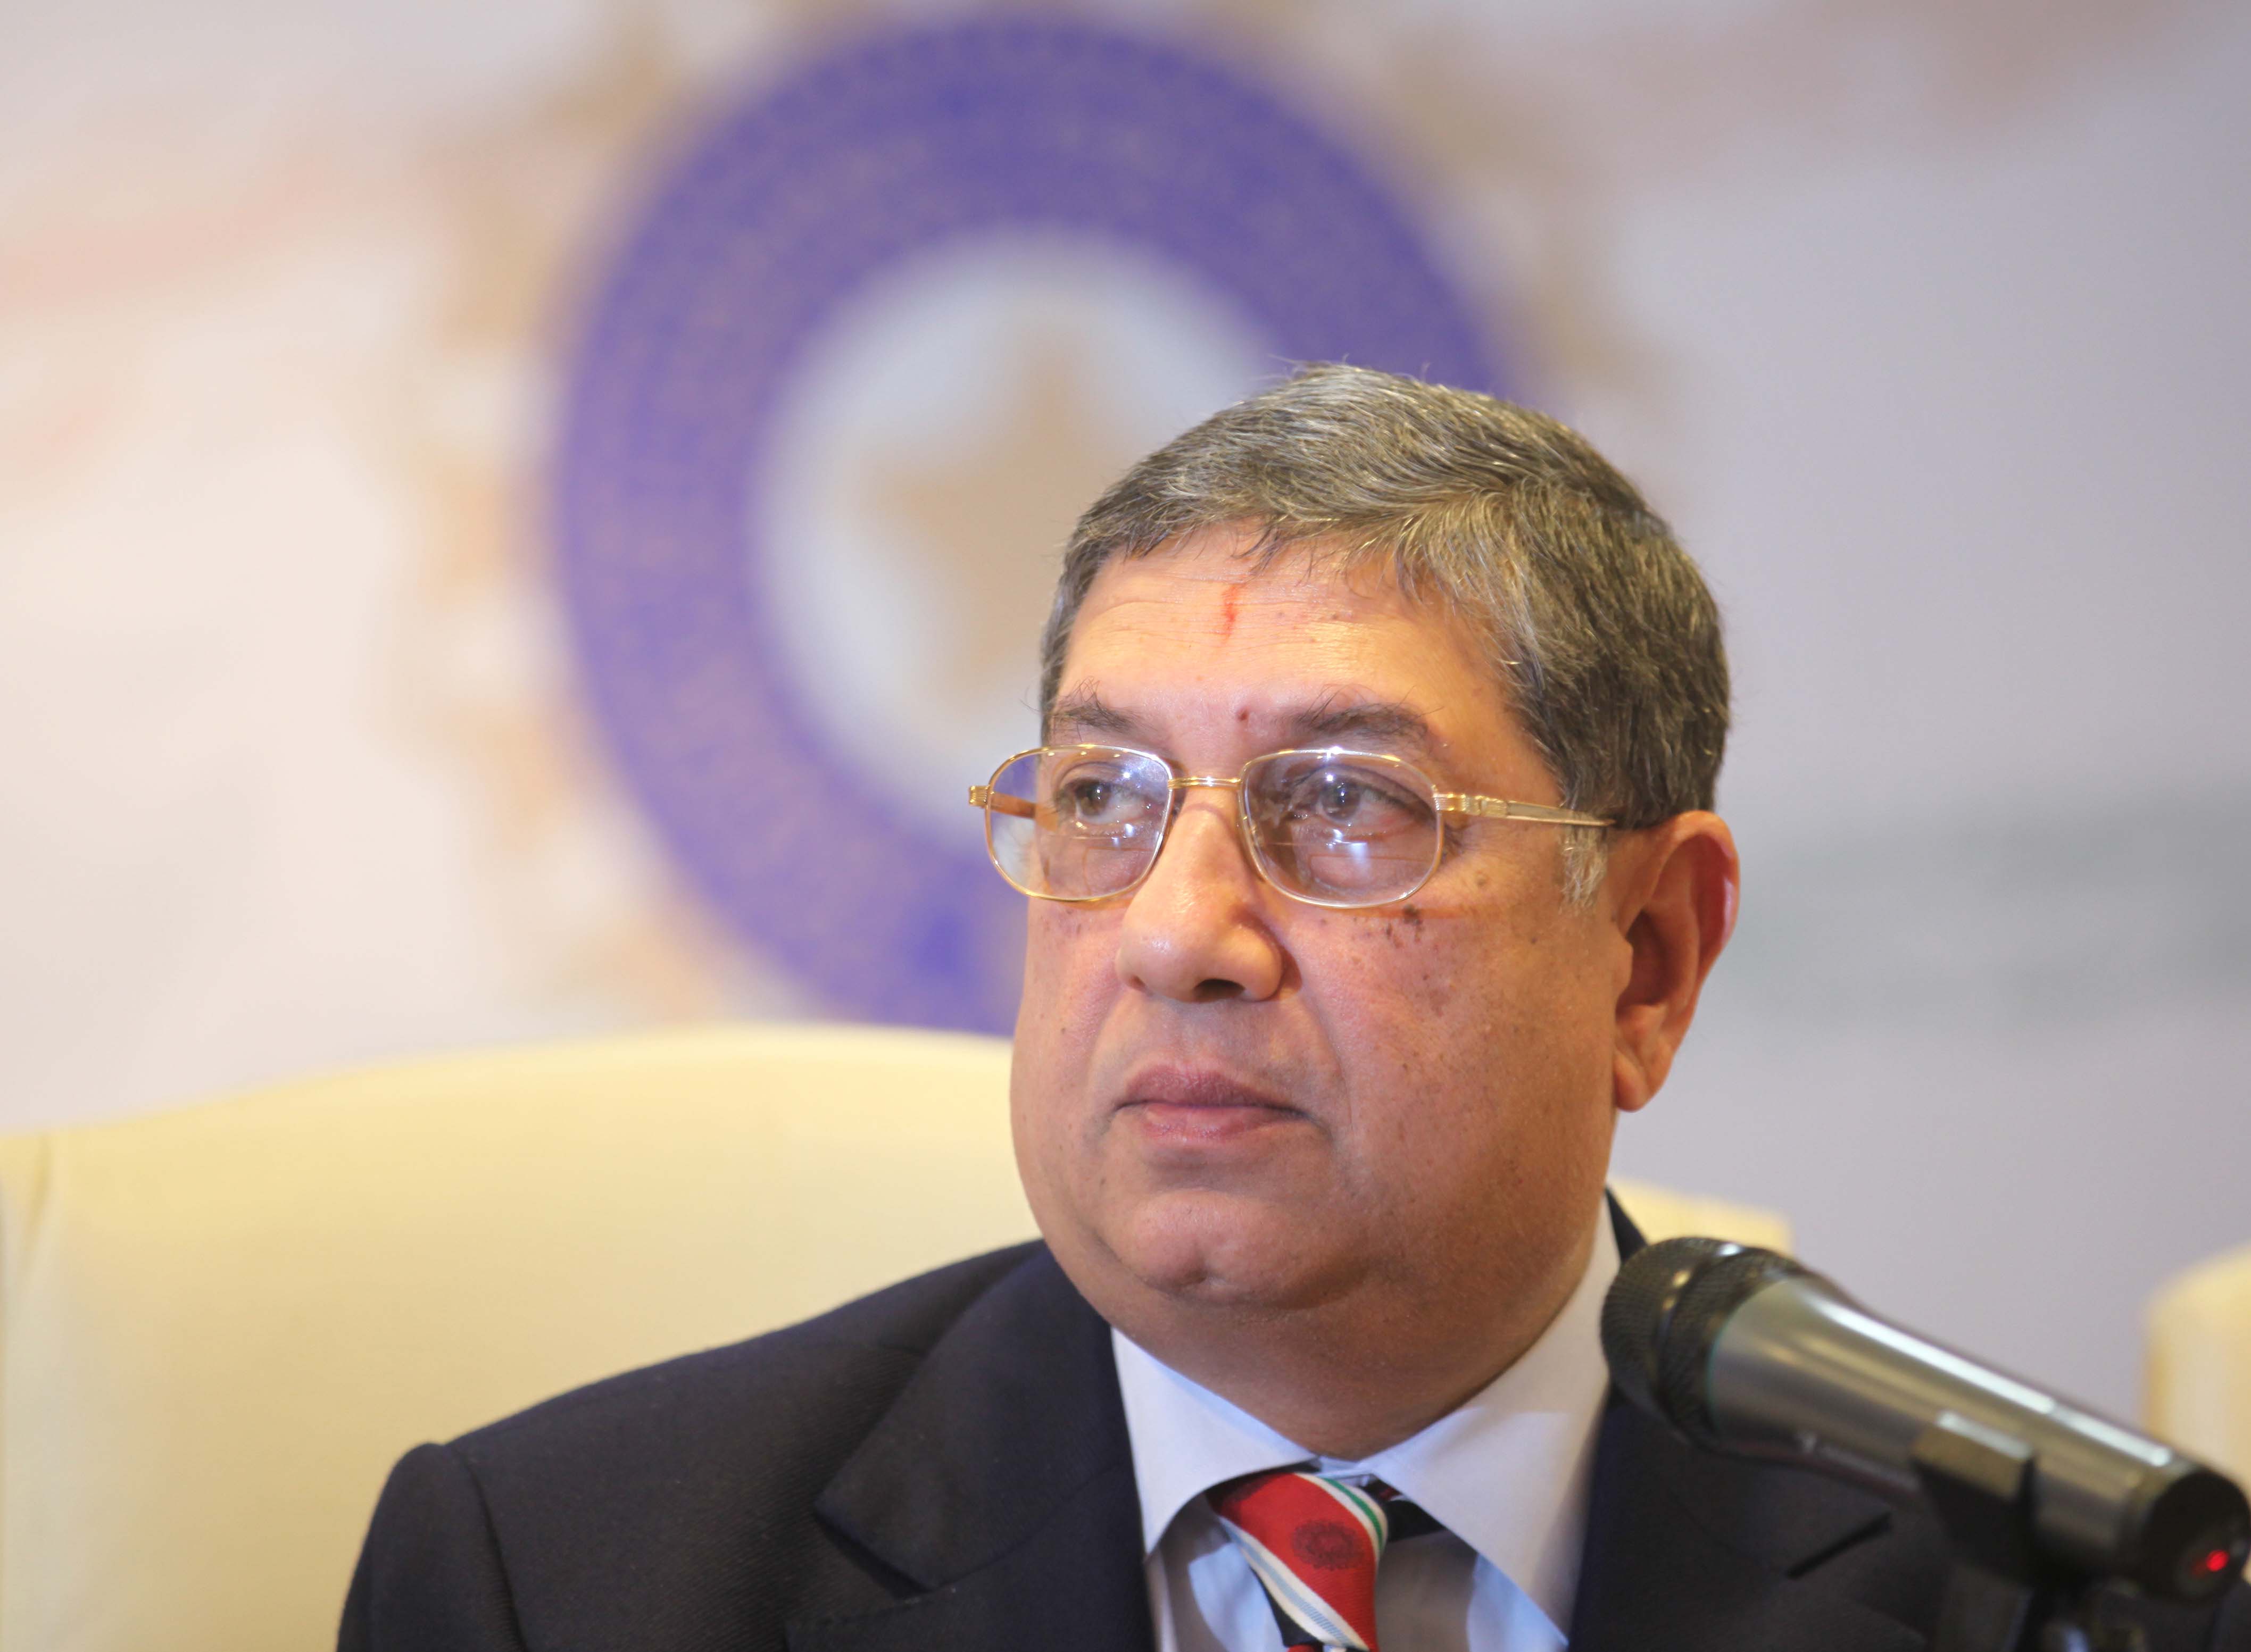 Shashank Manohar has hurt India’s finances and reduced India’s importance in world cricket, alleges N Srinivasan